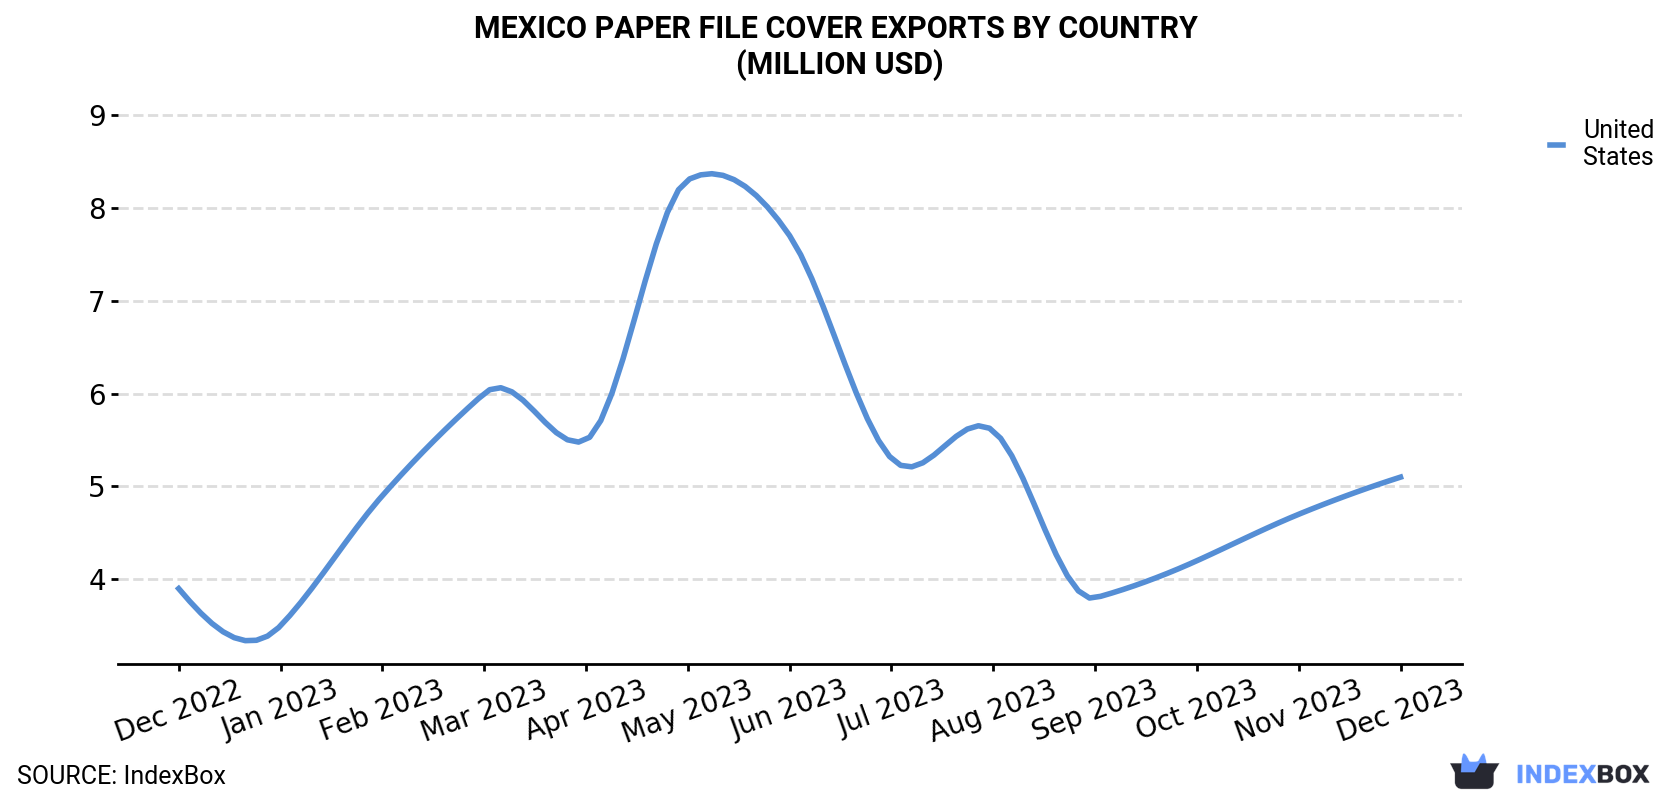 Mexico Paper File Cover Exports By Country (Million USD)